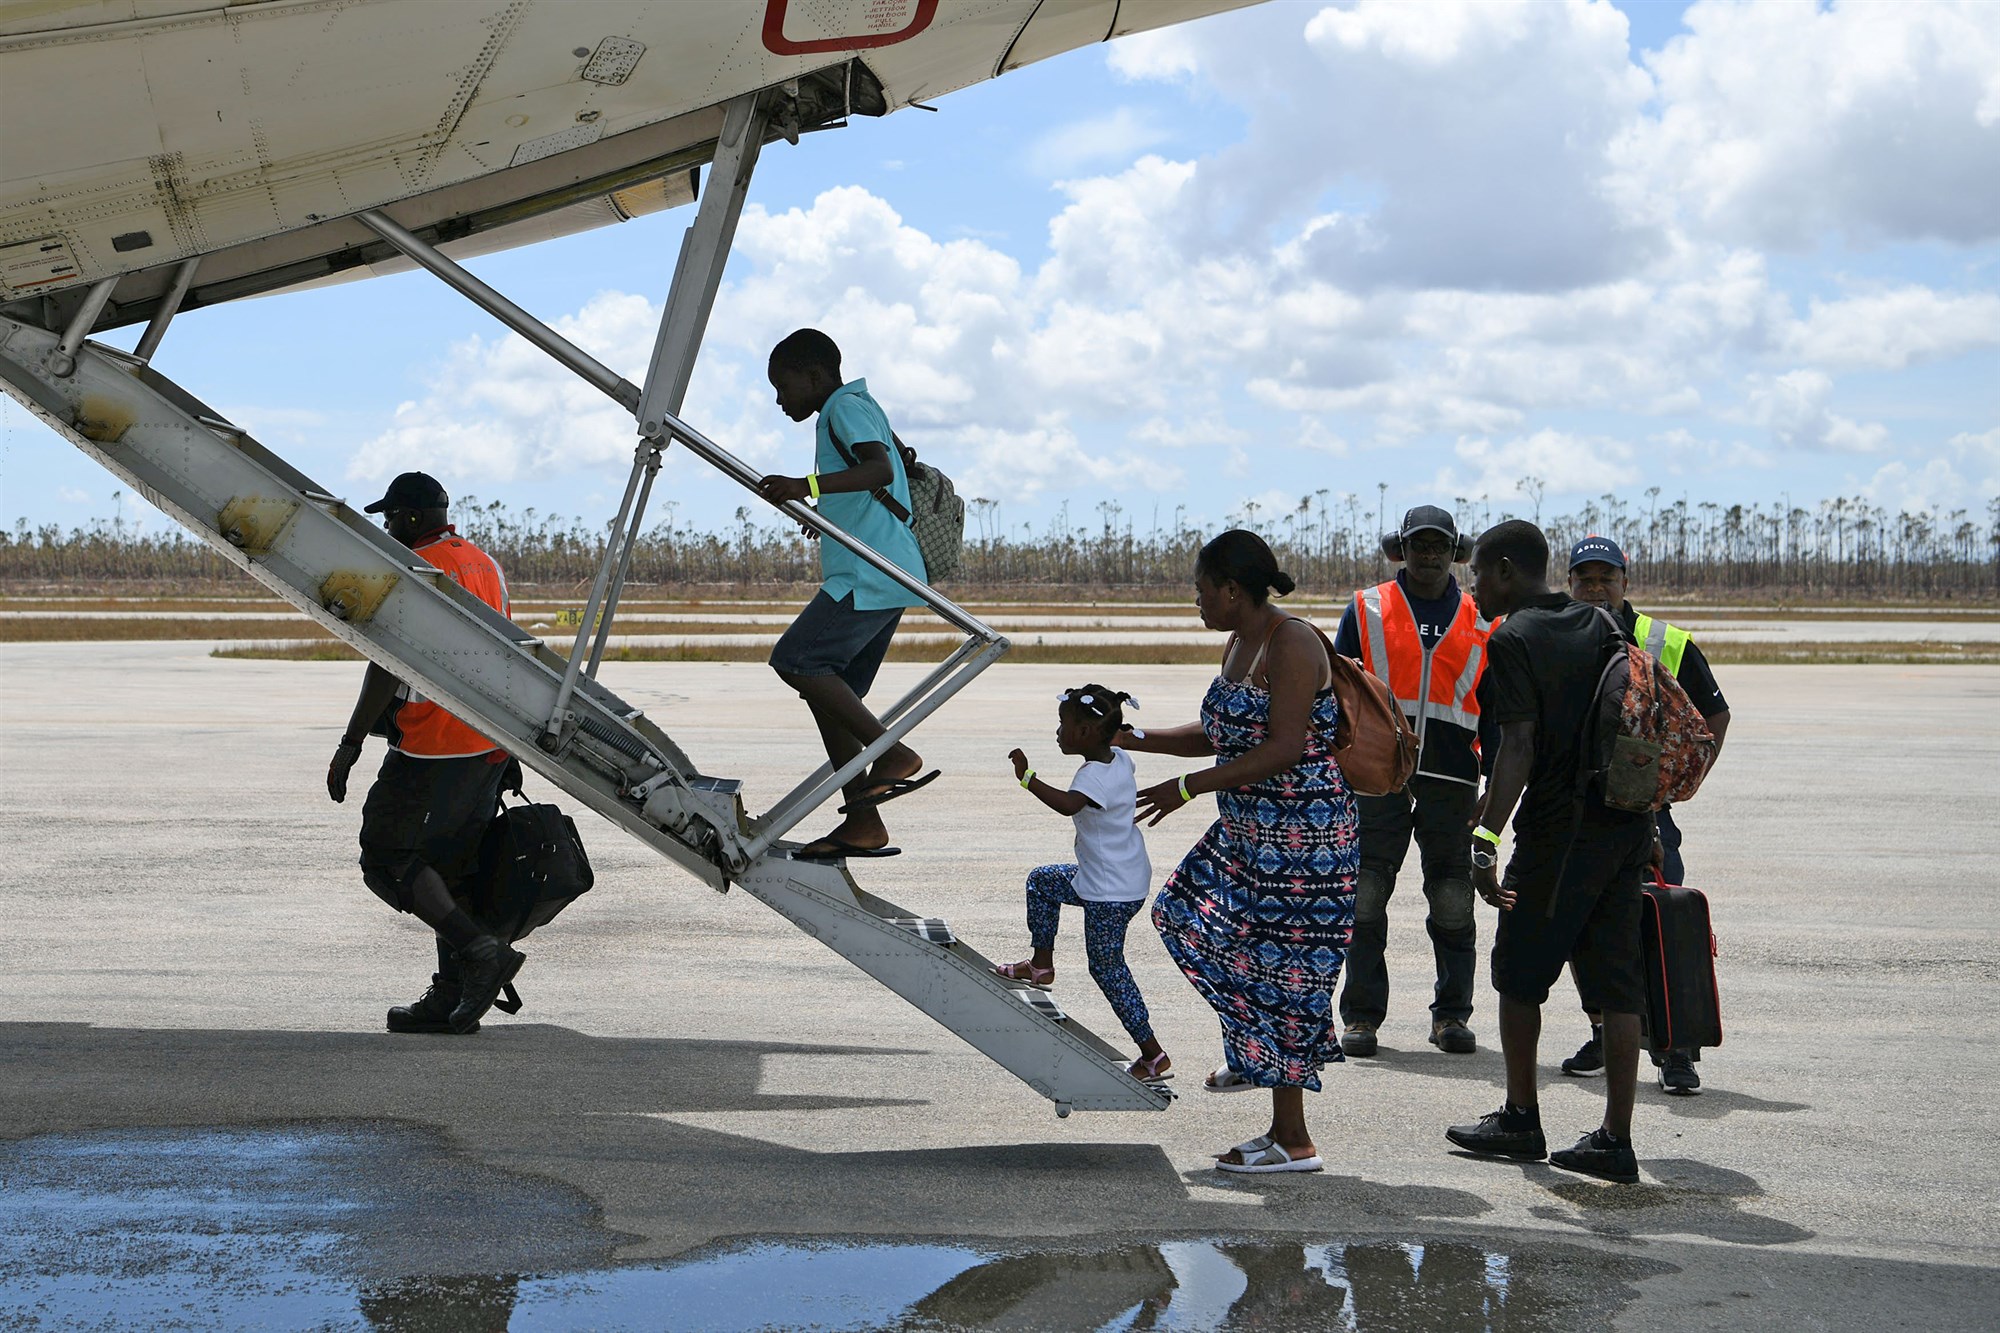 Abaco residents are evacuated from the island at the airport in the wake of Hurricane Dorian in Marsh Harbour, Great Abaco, Bahamas on 8 September 2019. Photo: Loren Elliott / Reuters